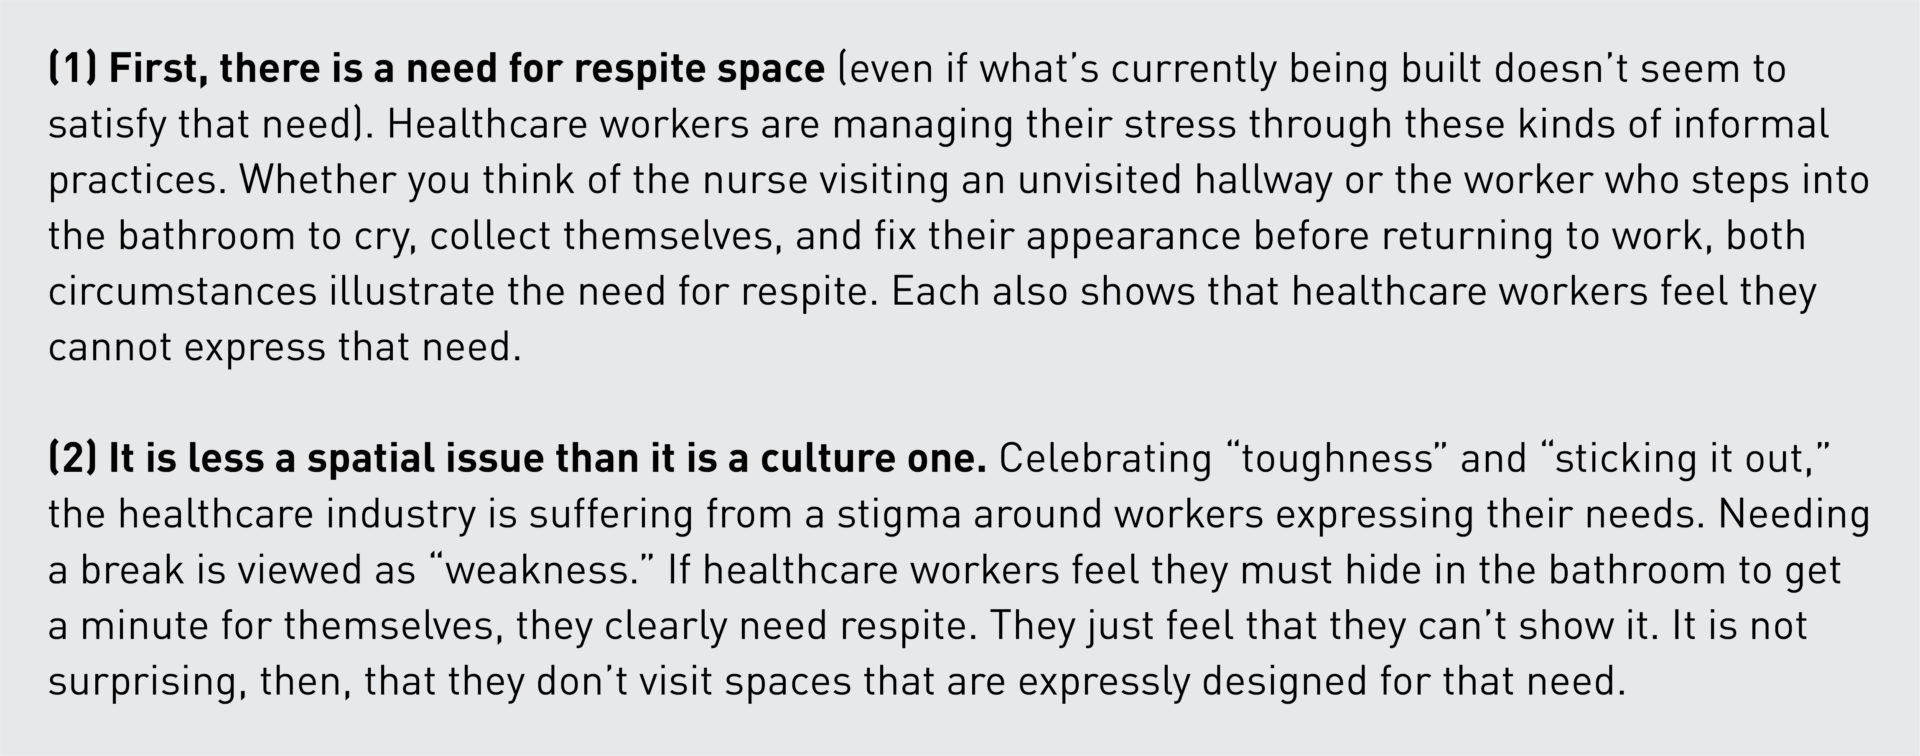 (1) First, there is a need for respite space (even if what’s currently being built doesn’t seem to satisfy that need). Healthcare workers are managing their stress through these kinds of informal practices. Whether you think of the nurse visiting an unvisited hallway or the worker who steps into the bathroom to cry, collect themselves, and fix their appearance before returning to work, both circumstances illustrate the need for respite. Each also shows that healthcare workers feel they cannot express that need.  (2) It is less a spatial issue than it is a culture one. Celebrating “toughness” and “sticking it out,” the healthcare industry is suffering from a stigma around workers expressing their needs. Needing a break is viewed as “weakness.” If healthcare workers feel they must hide in the bathroom to get a minute for themselves, they clearly need respite. They just feel that they can’t show it. It is not surprising, then, that they don’t visit spaces that are expressly designed for that need.